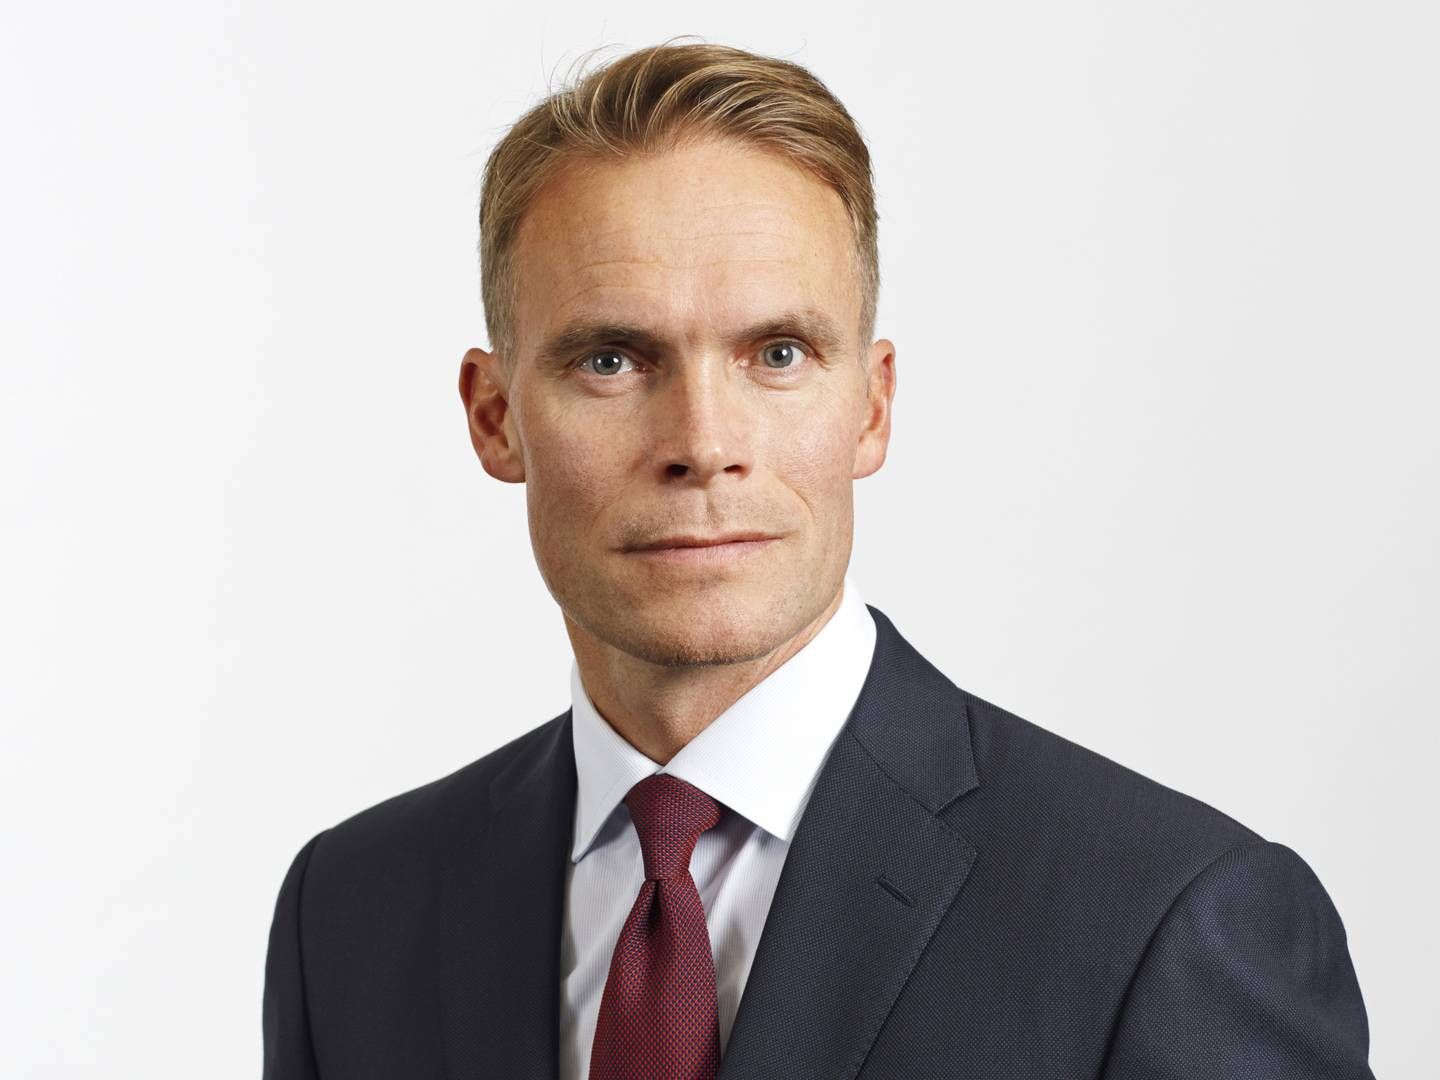 Trond Grande is the deputy CEO of NBIM, which manages the oil fund. | Photo: PR / NBIM